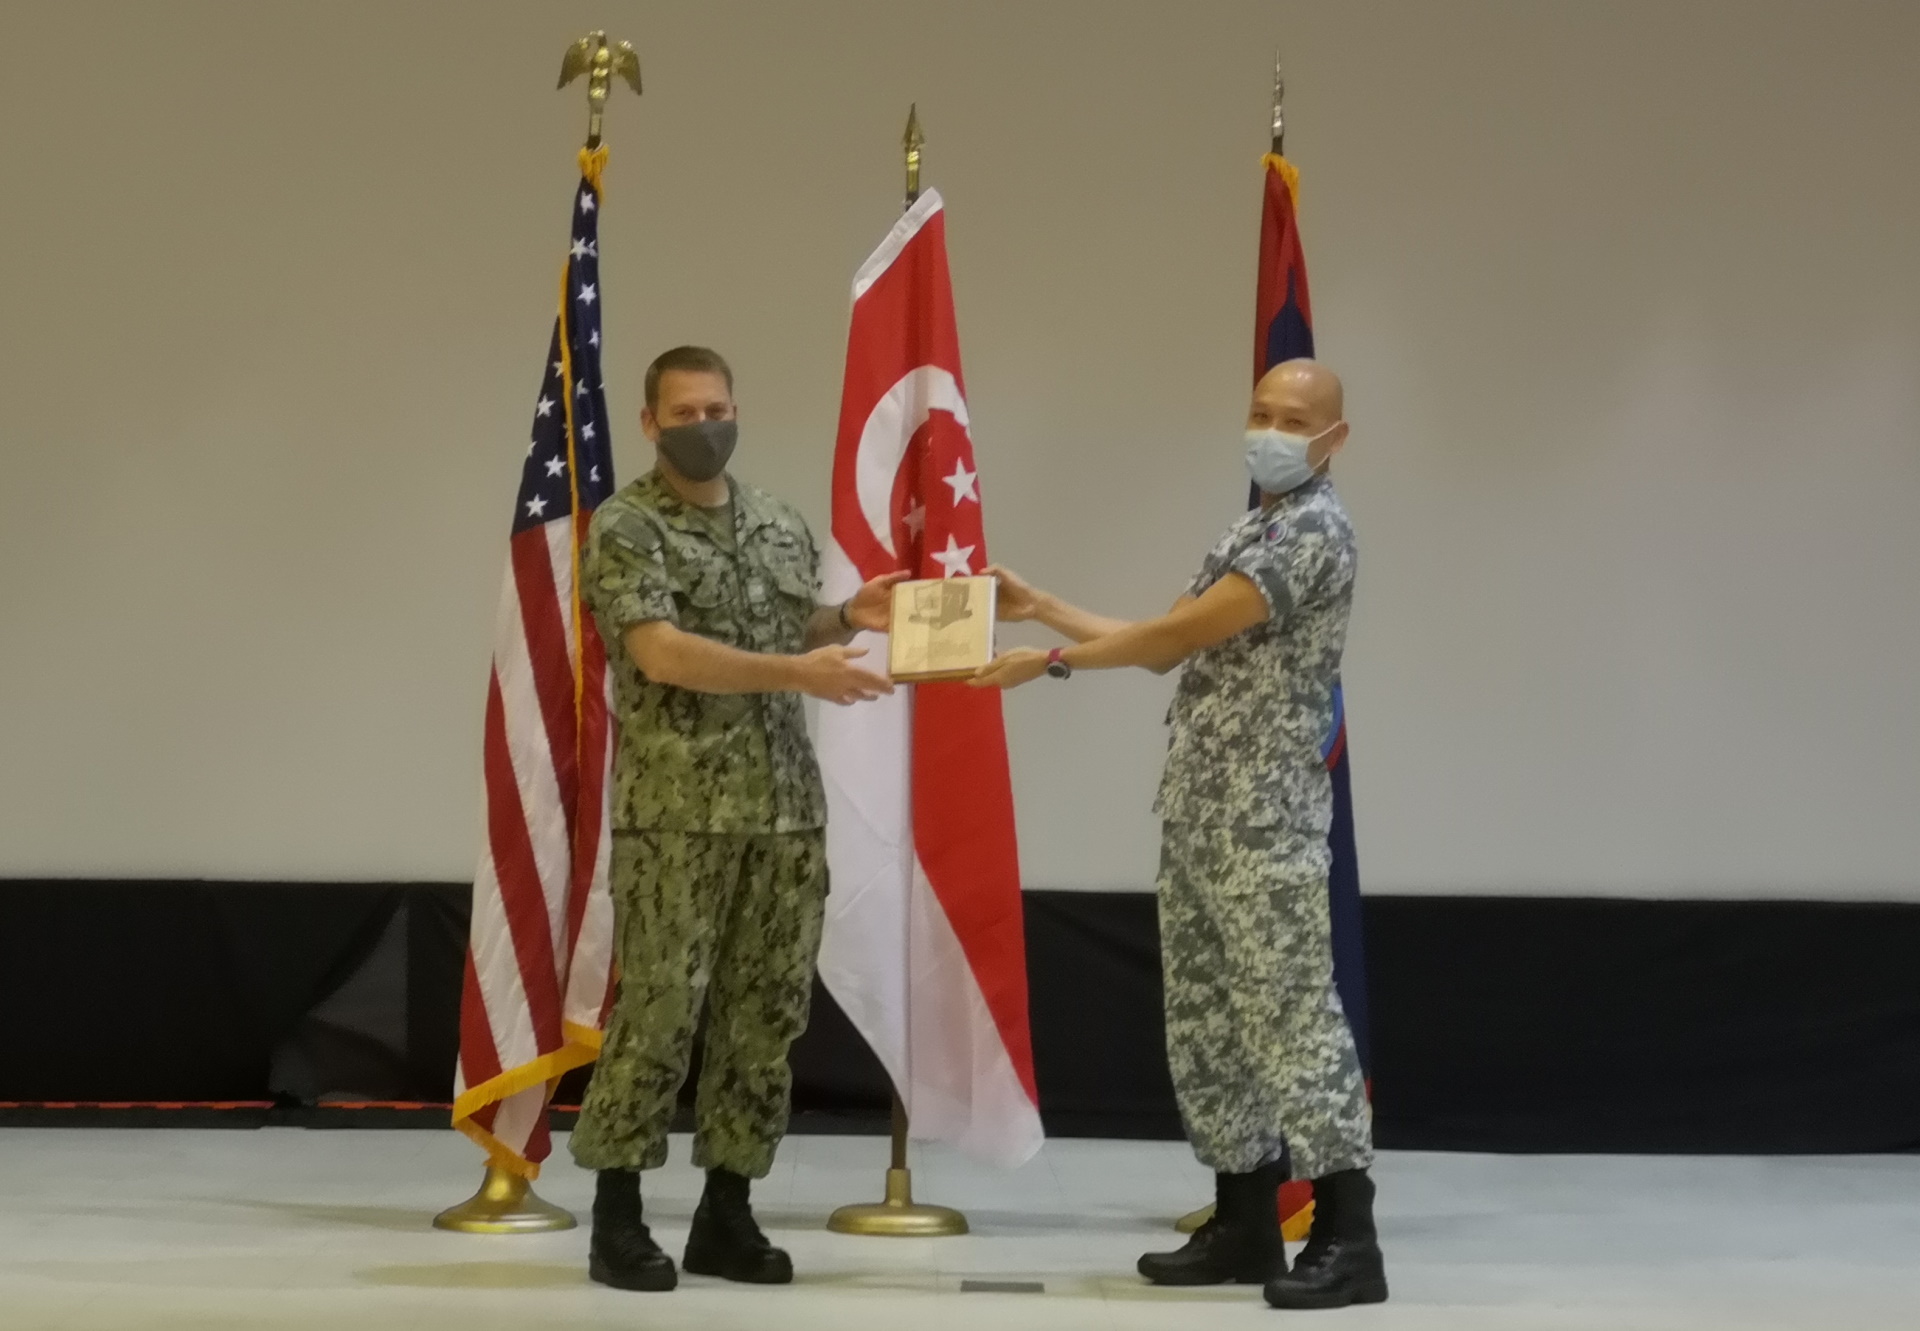 The RSN's Deputy Fleet Commander and exercise task force commander, Colonel Ooi Tjin Kai (right) and the USN's Commander Task Force 71, Captain Chase Sargeant (left) officiating at the opening ceremony of XPG21.